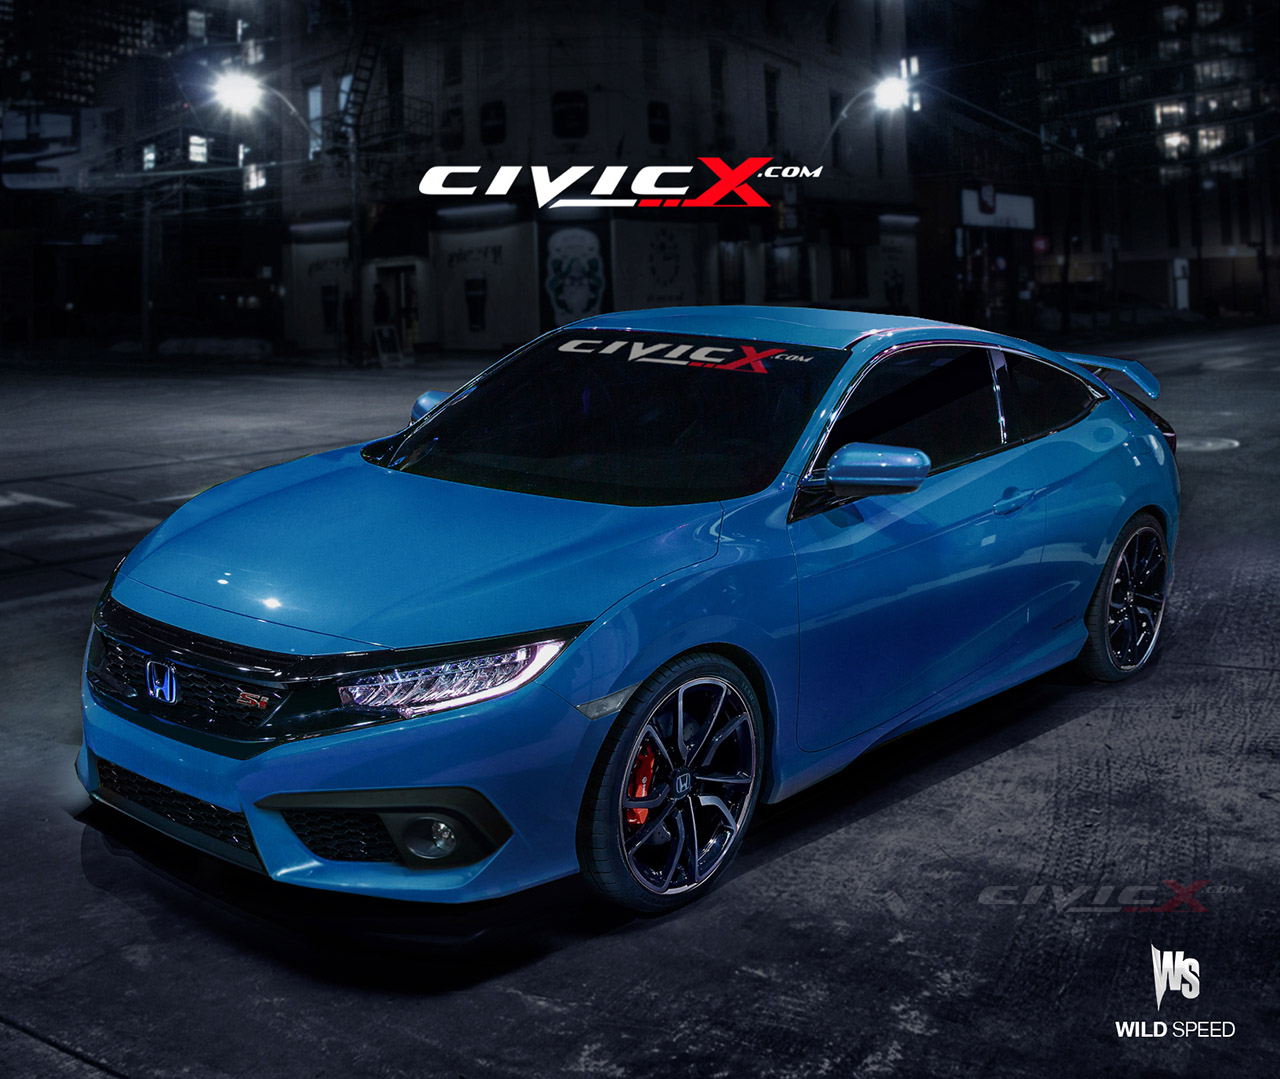 Honda is certainly on a roll this time around, with the 2017 Honda Civic Si all set for a November debut, while we bring you additional information about the Honda Civic Type R.